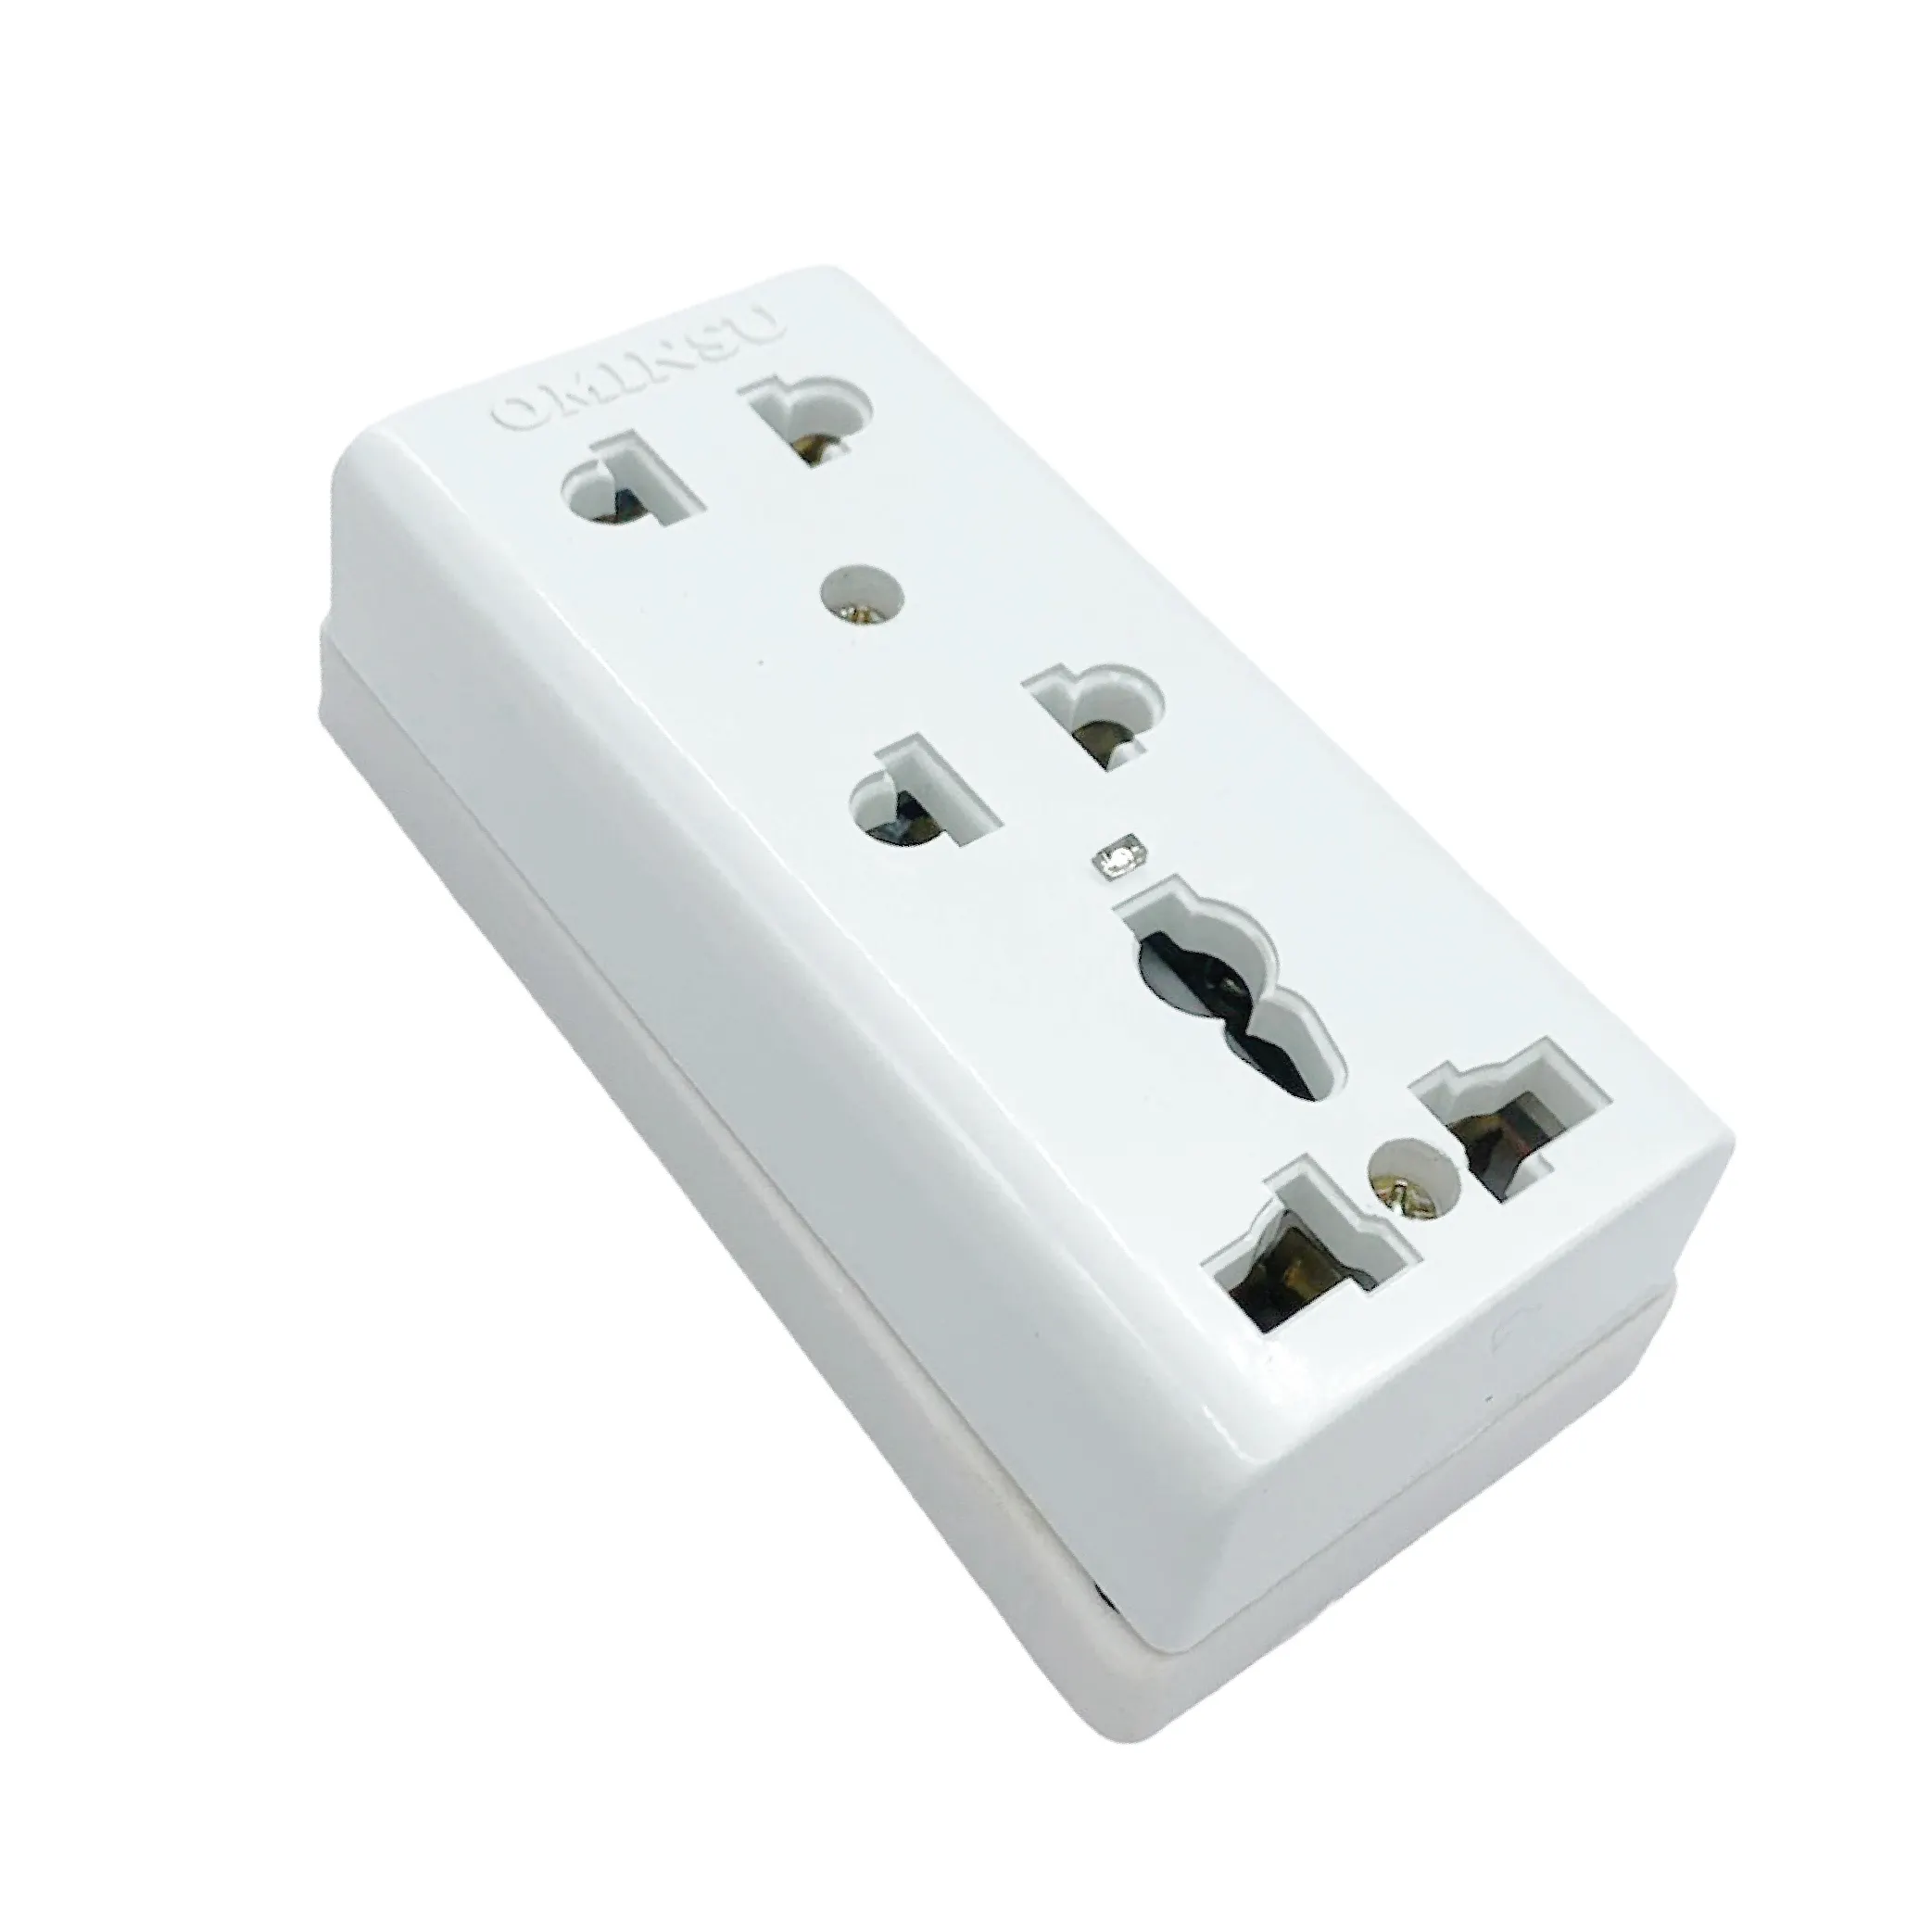 Extension Sockets 3 outlets Socket T8Y OMINSU 1 Universal 2 Two Pin Socket Export from Vietnam